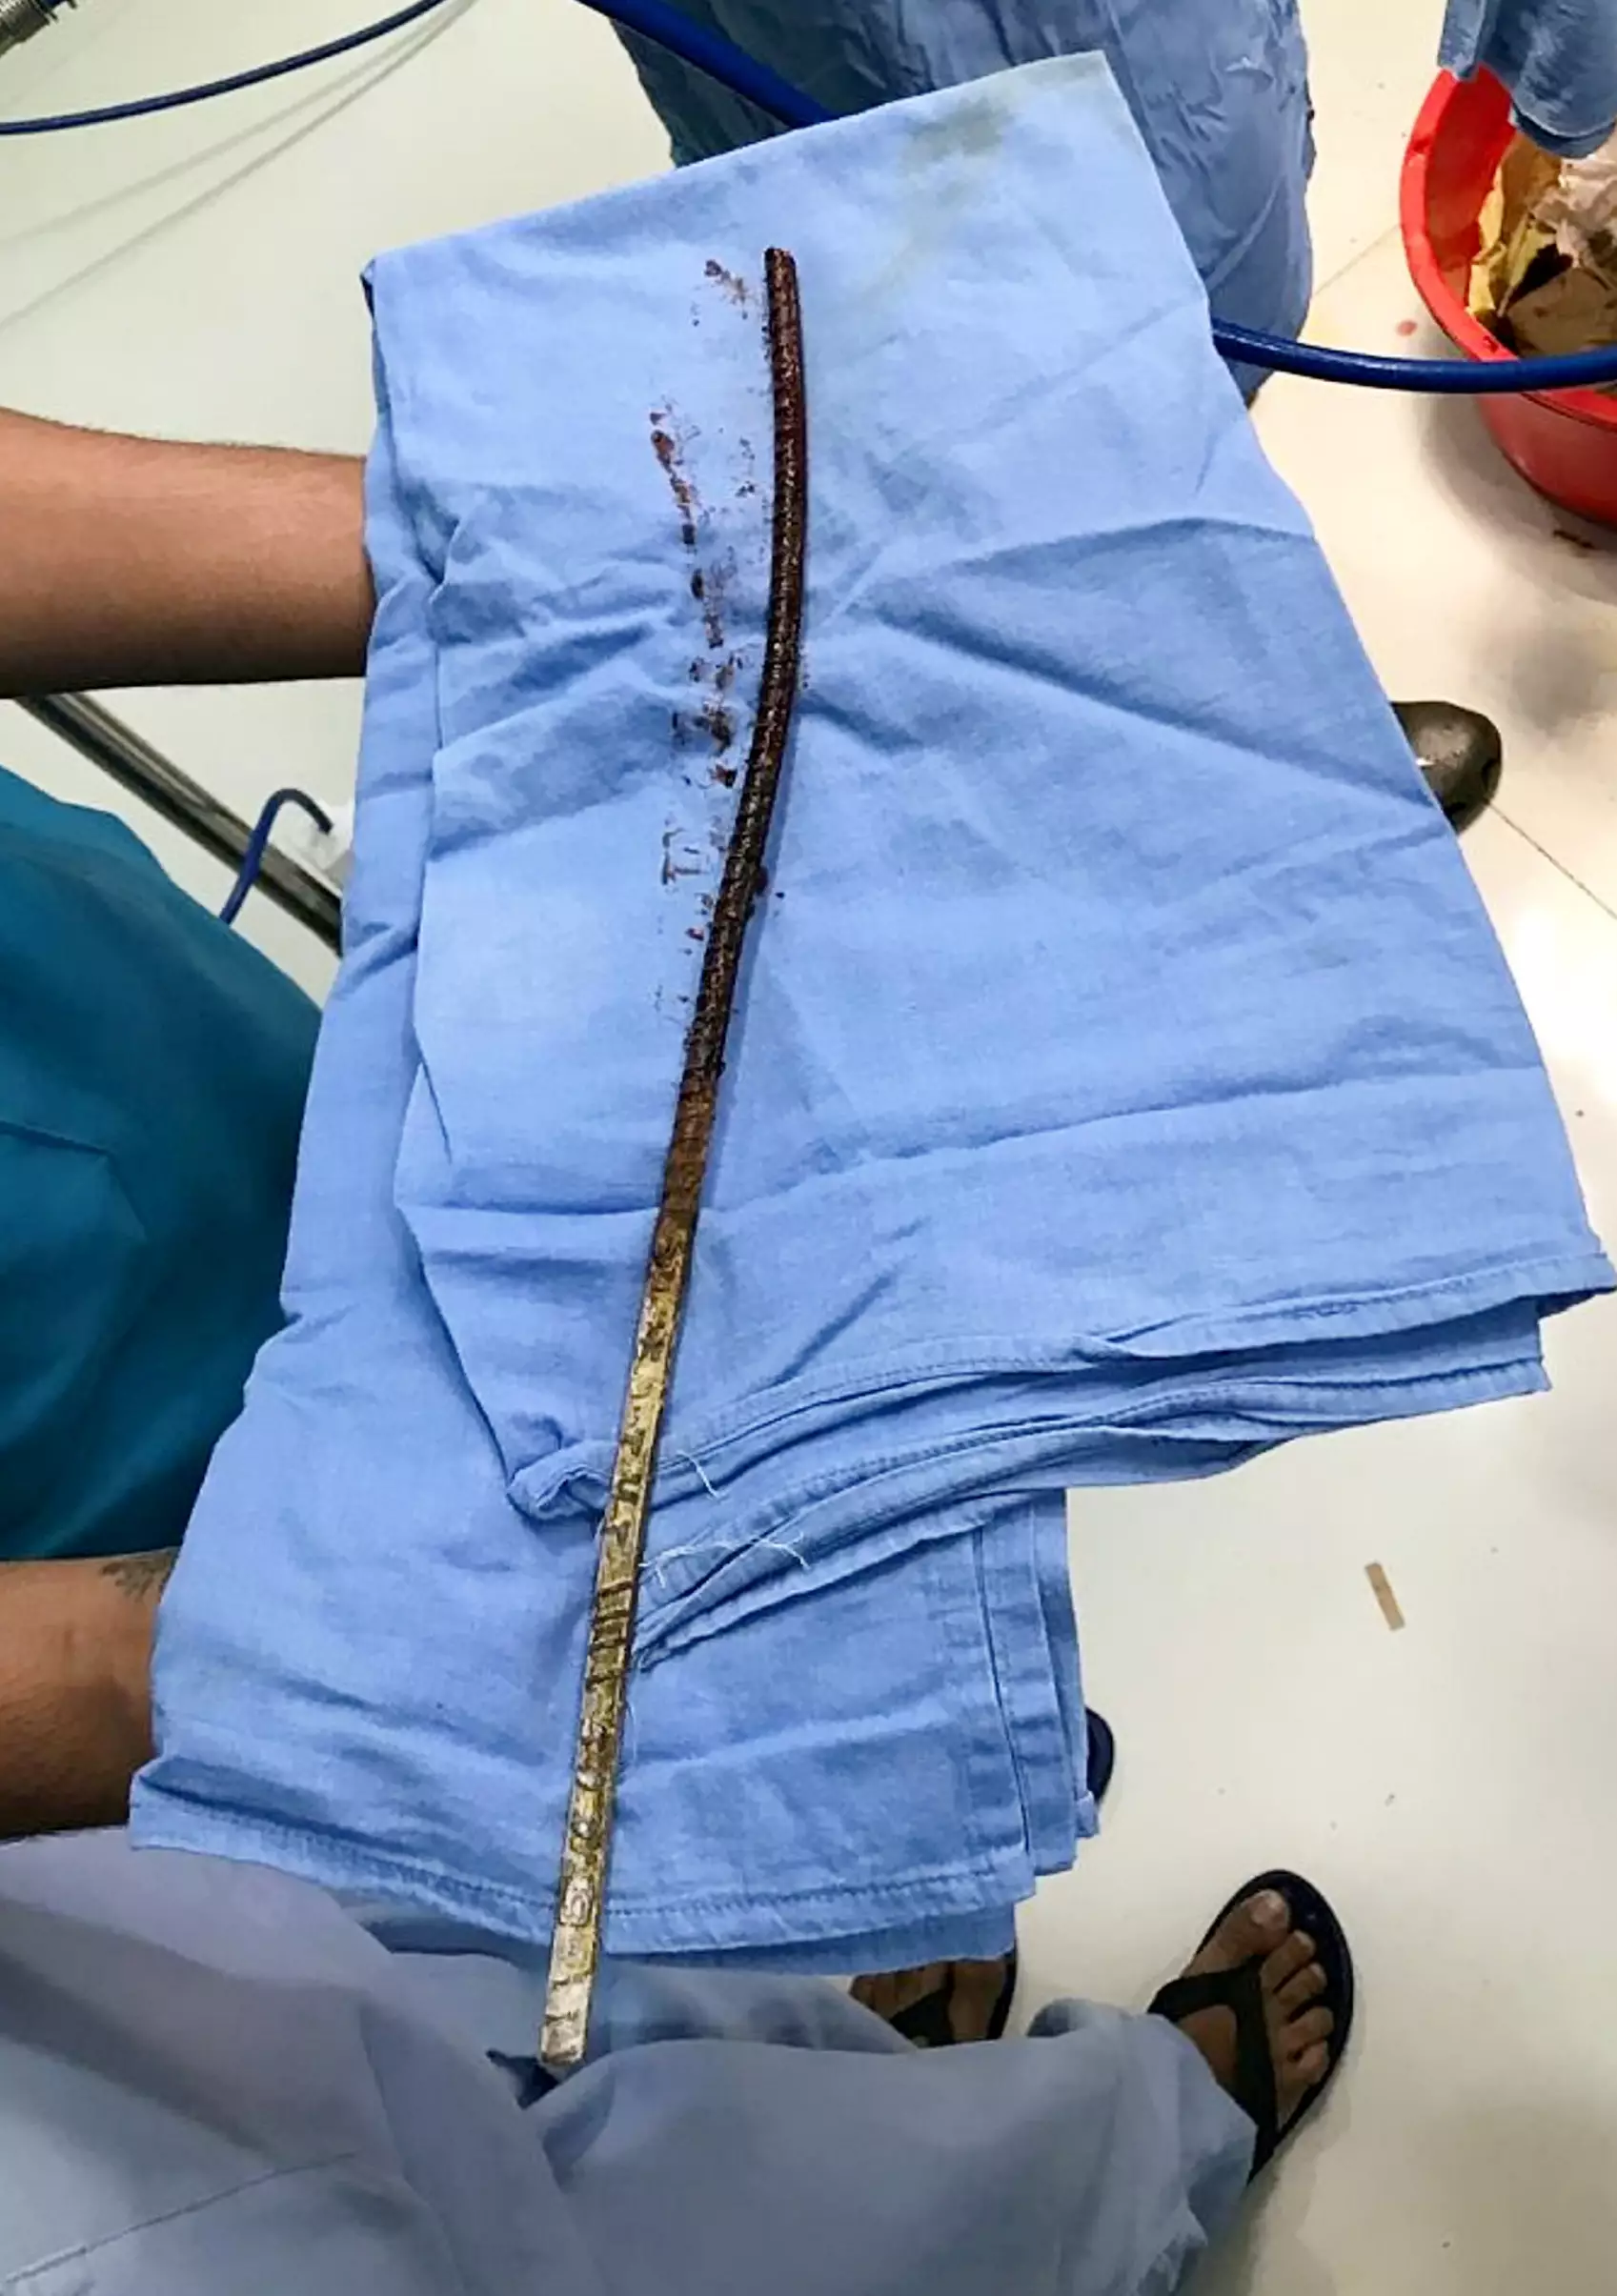 The rod after it was removed from the patient's head.